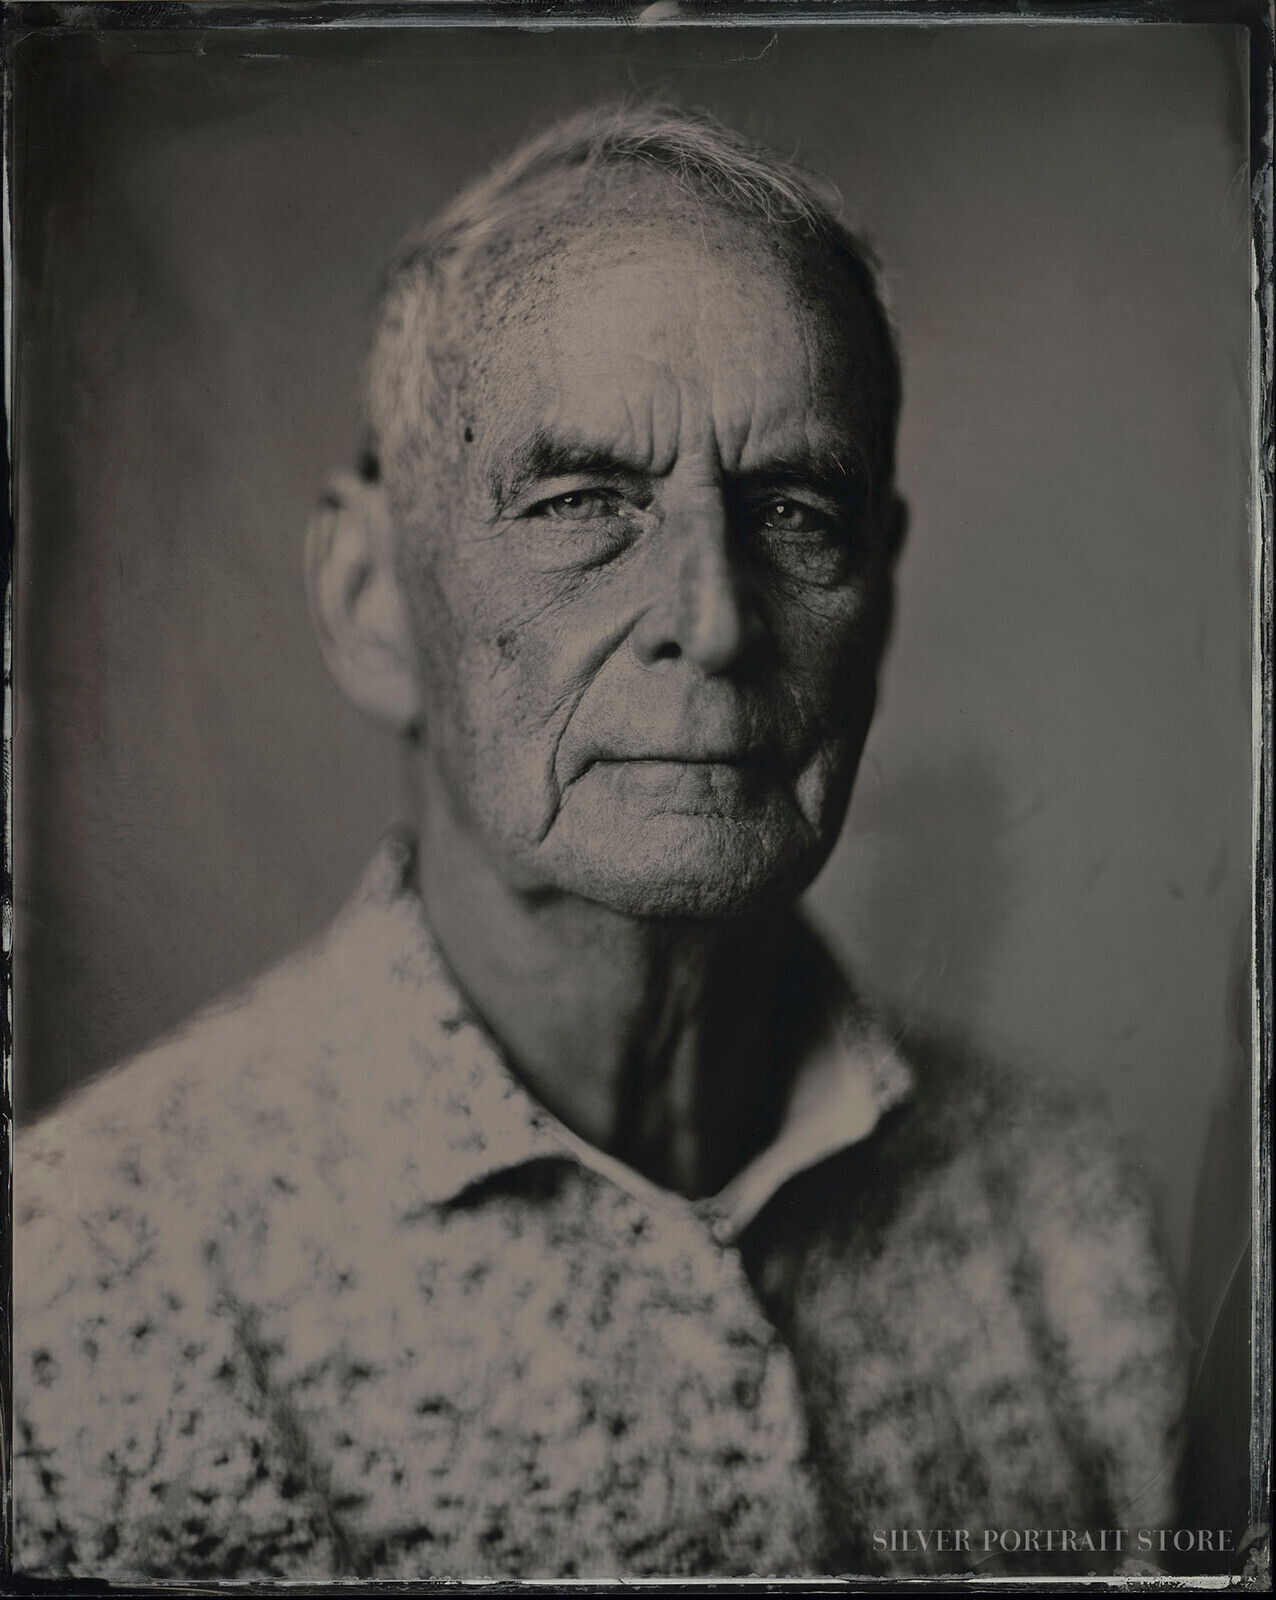 Tim -Silver Portrait Store-Wet plate collodion-Tintype 20 x 25 cm.